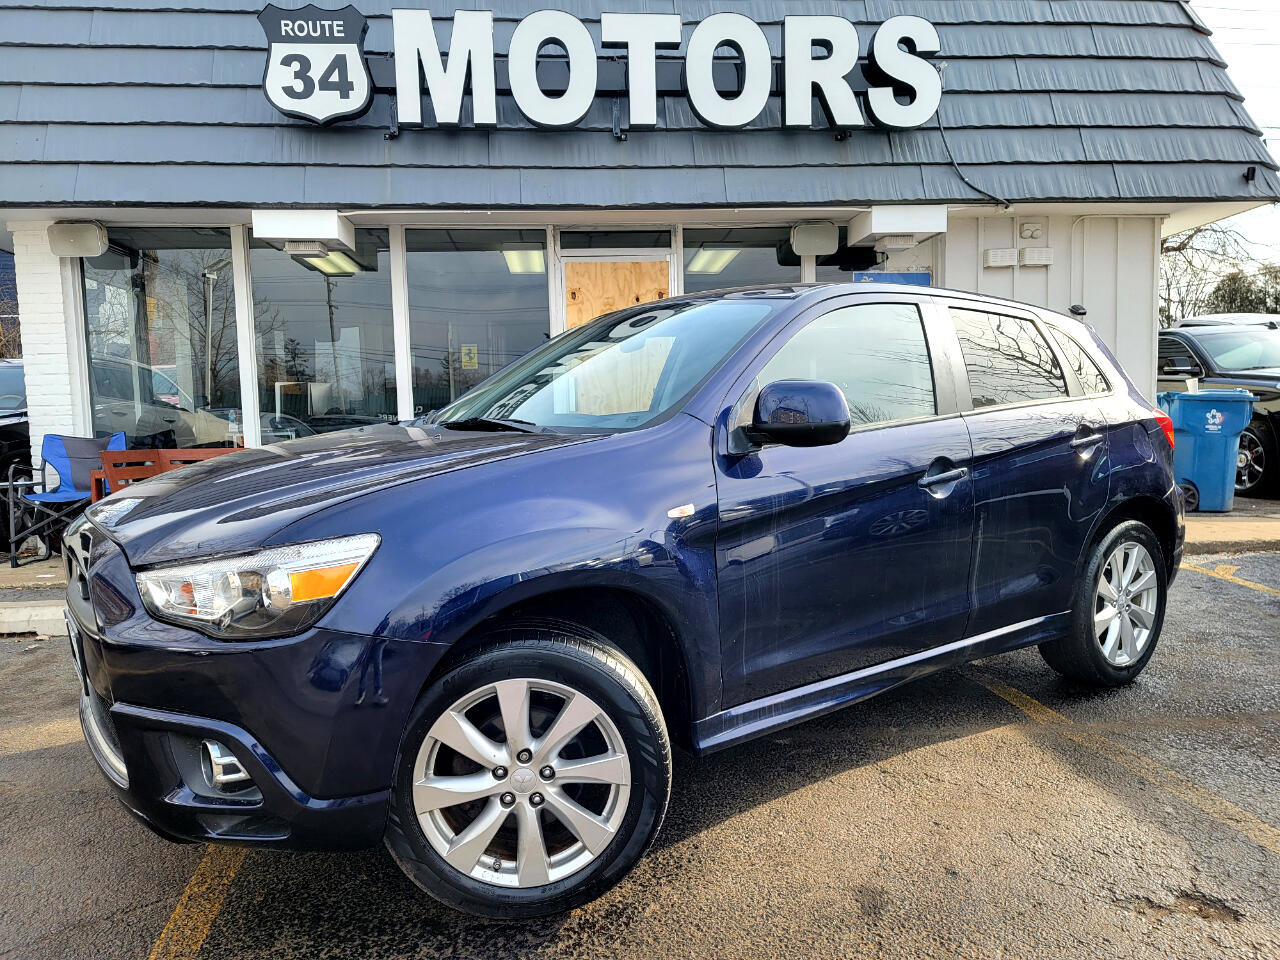 Used 2012 Mitsubishi Outlander Sport for Sale Right Now - Autotrader